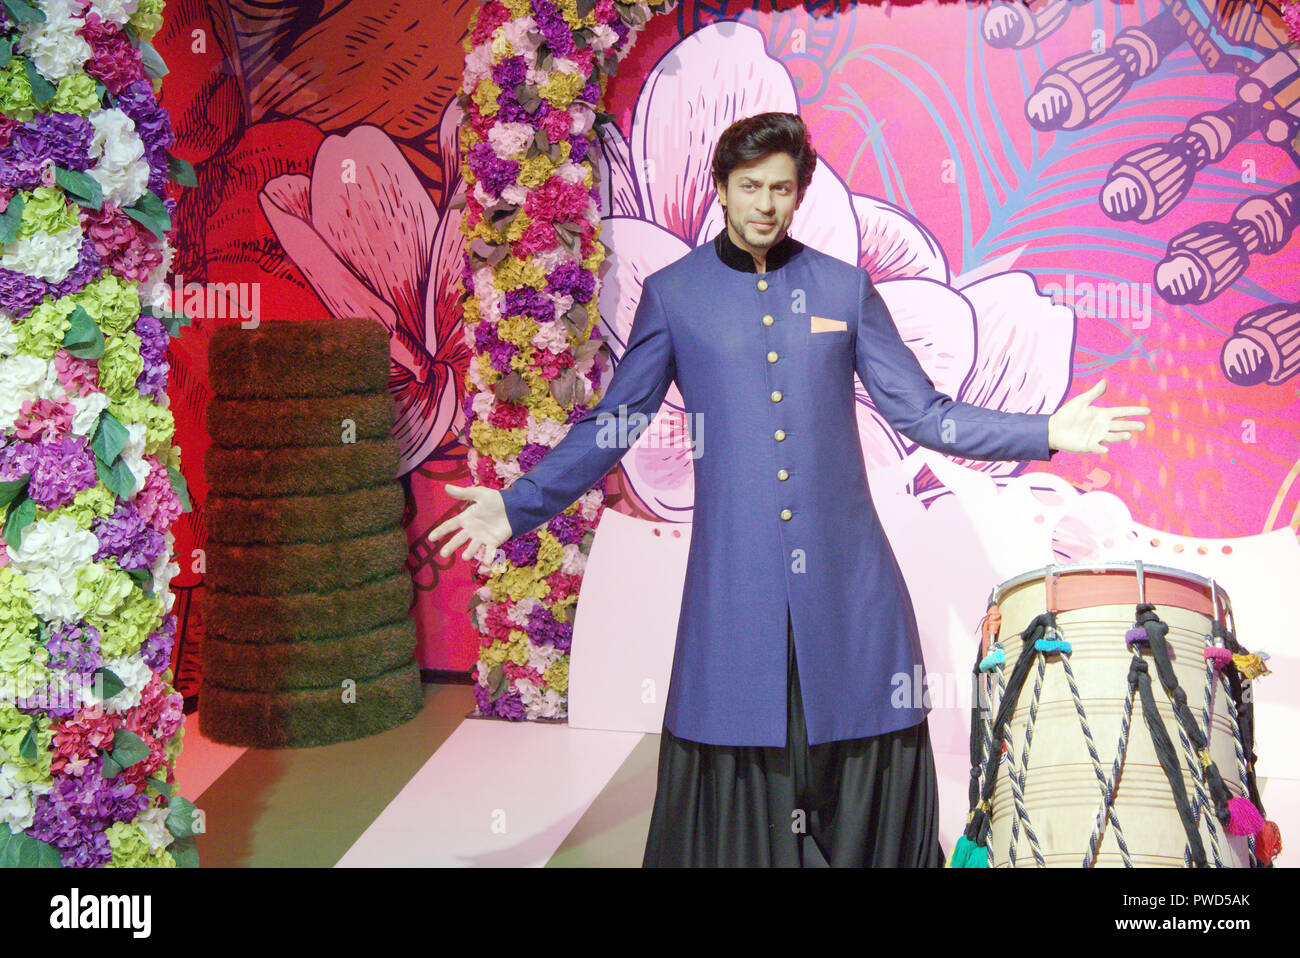 Wax figure of Bollywood actor Shah Rukh Khan at Madame Tussauds museum, Delhi Stock Photo